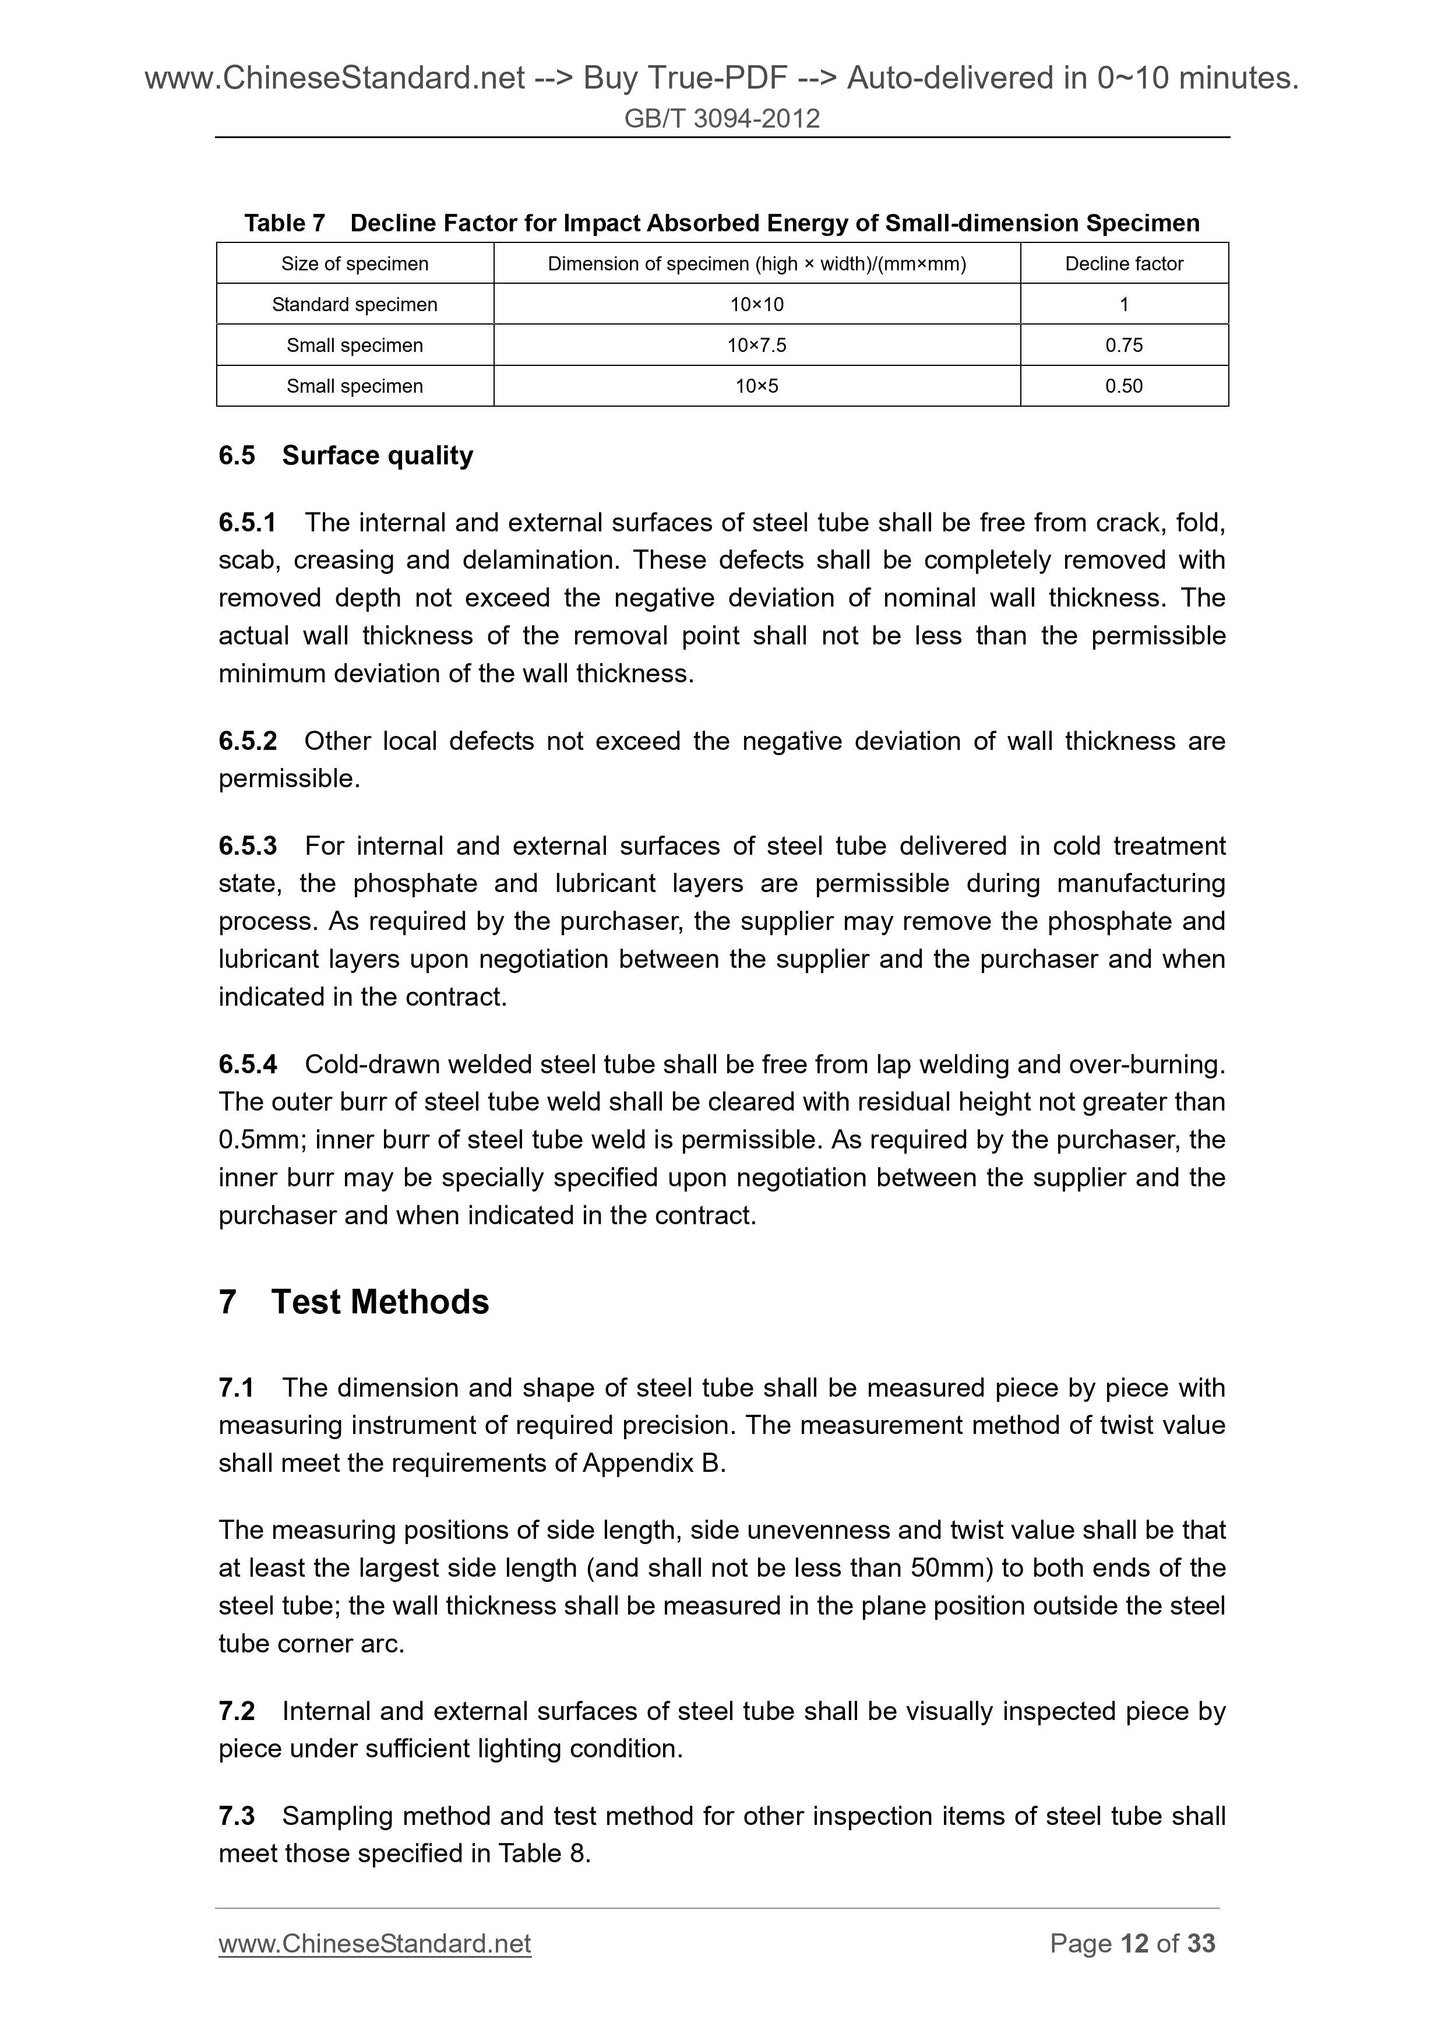 GB/T 3094-2012 Page 10